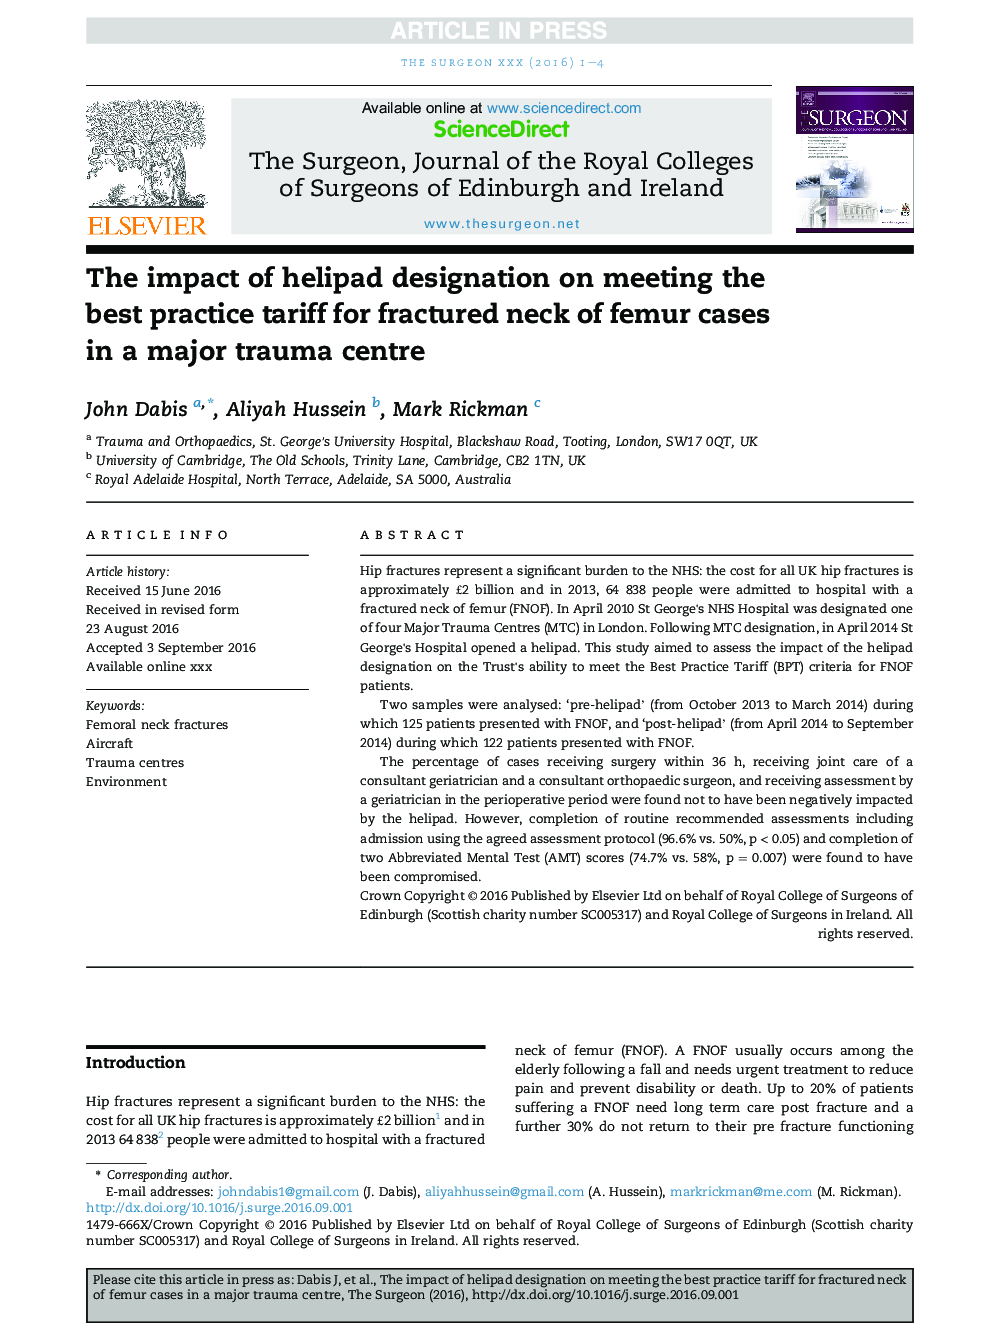 The impact of helipad designation on meeting the best practice tariff for fractured neck of femur cases in a major trauma centre